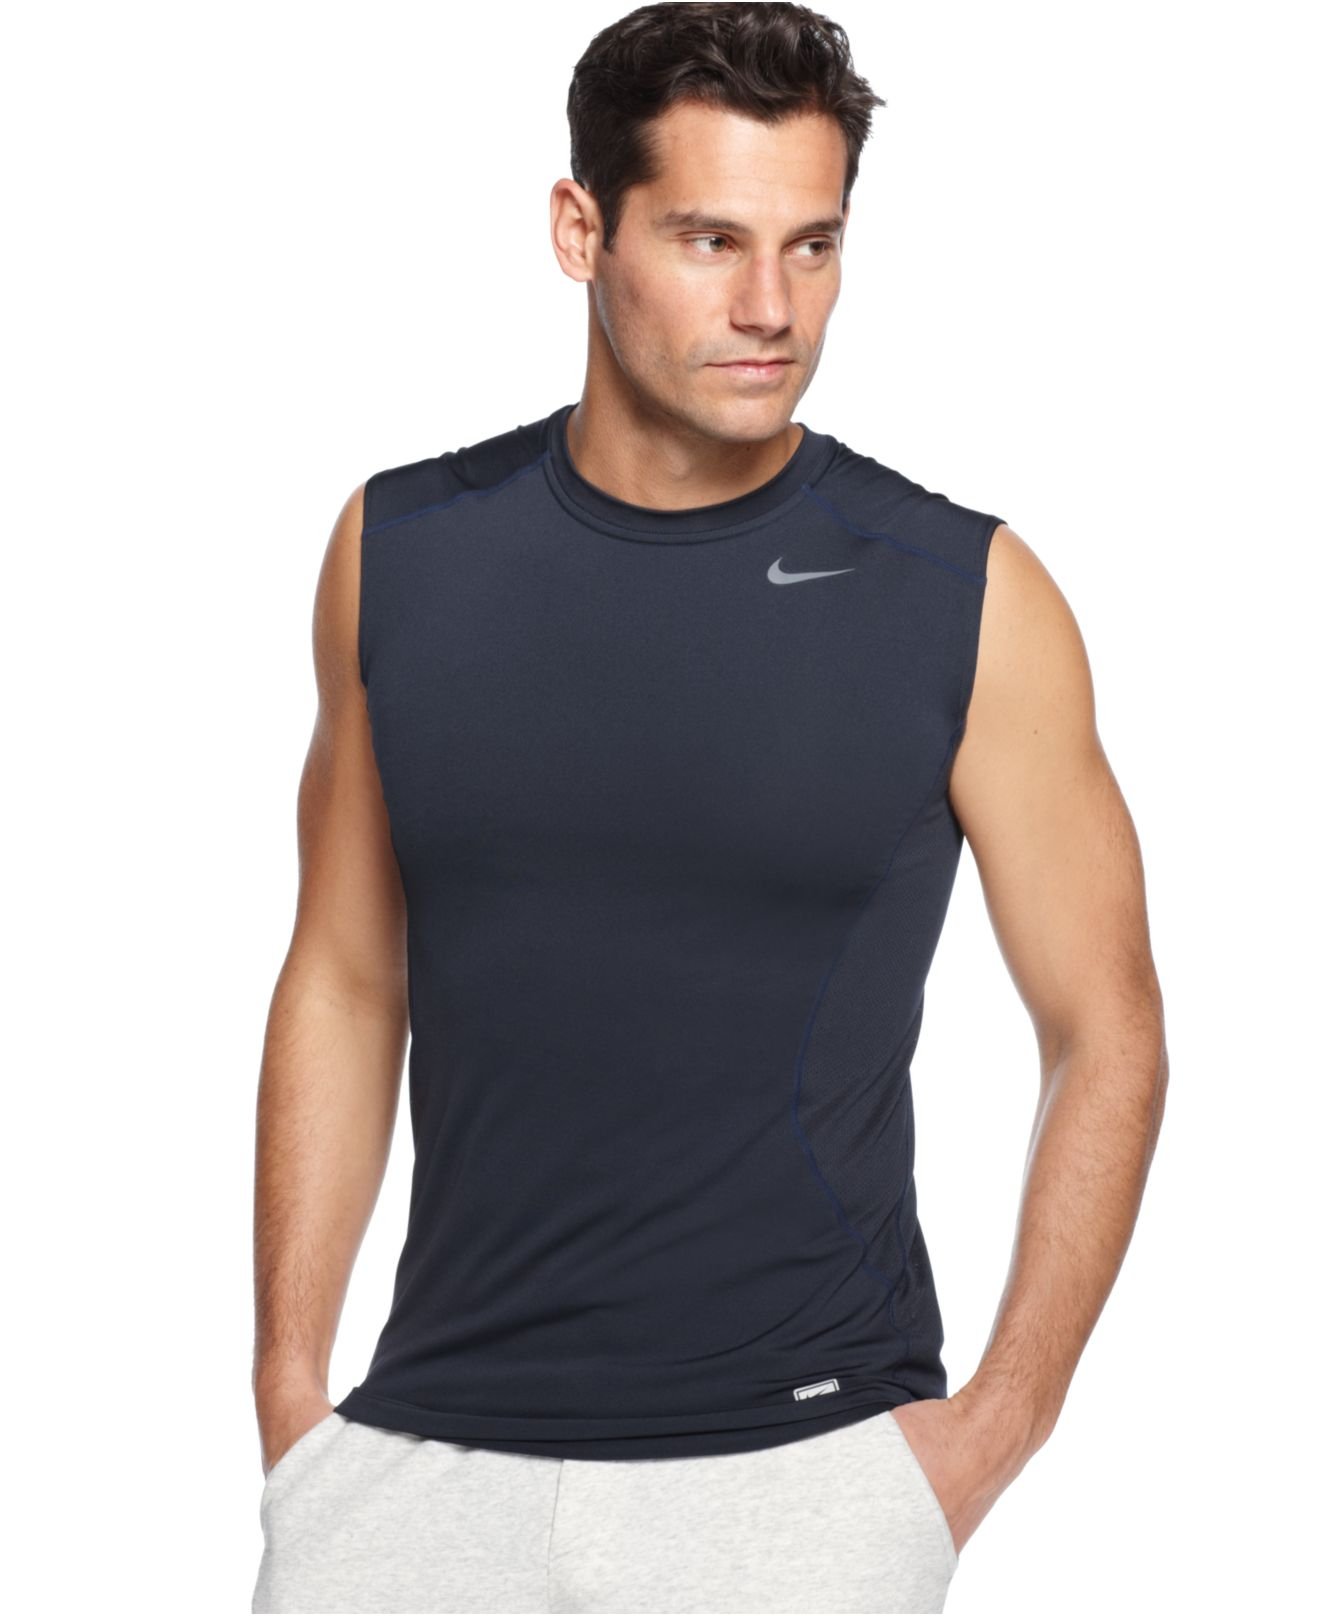 Nike Pro-Combat Dri-Fit Fitted Sleeveless Tee in Black for Men - Lyst